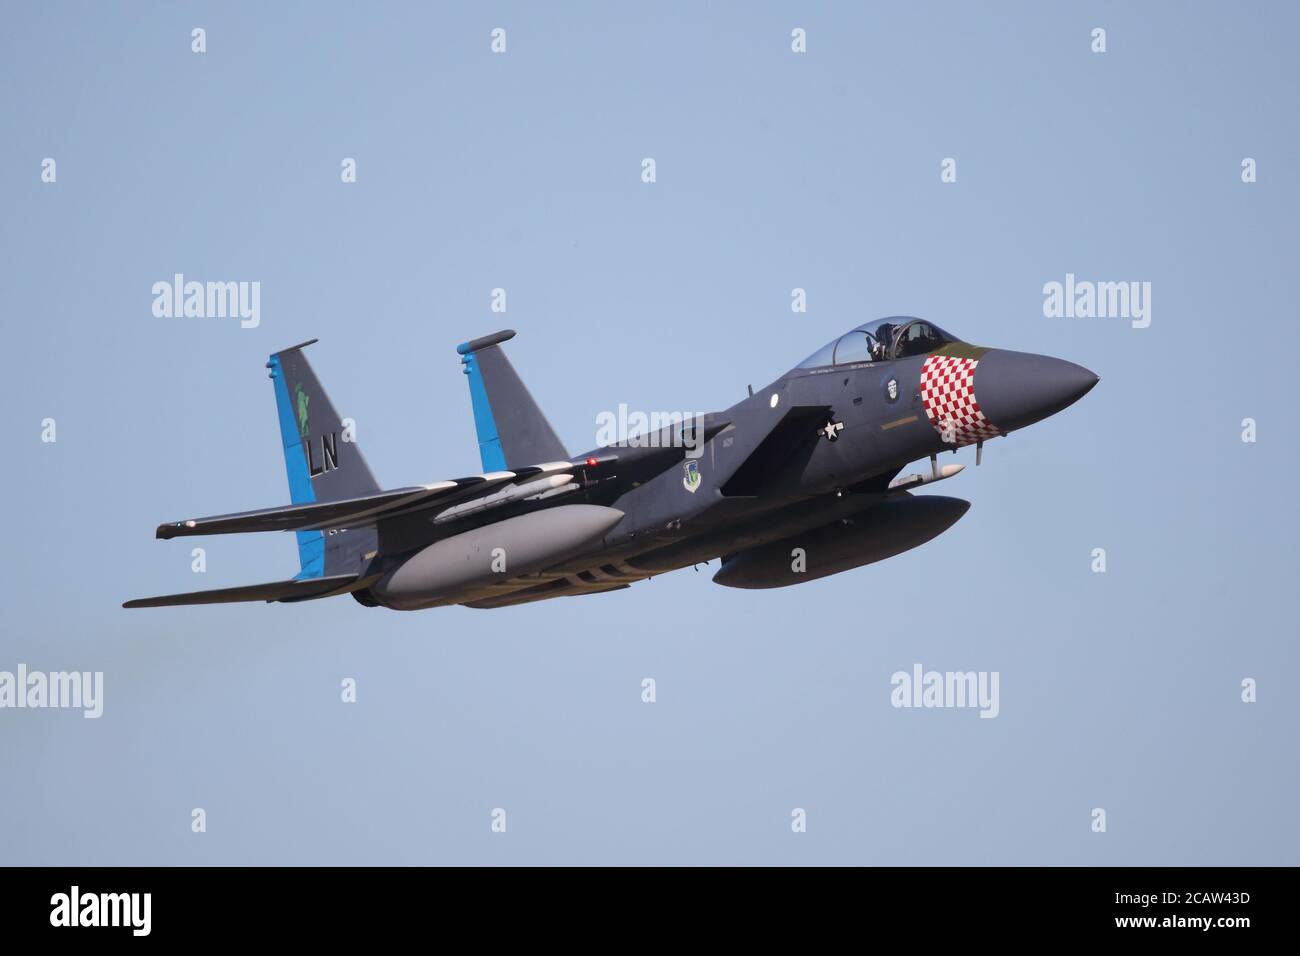 US Air Force McDonnell Douglas F-15 Strike Eagle of the 48th Fighter Wing in Blue Tail Heritage markings practising at RAF Lakenheath, Suffolk, UK Stock Photo